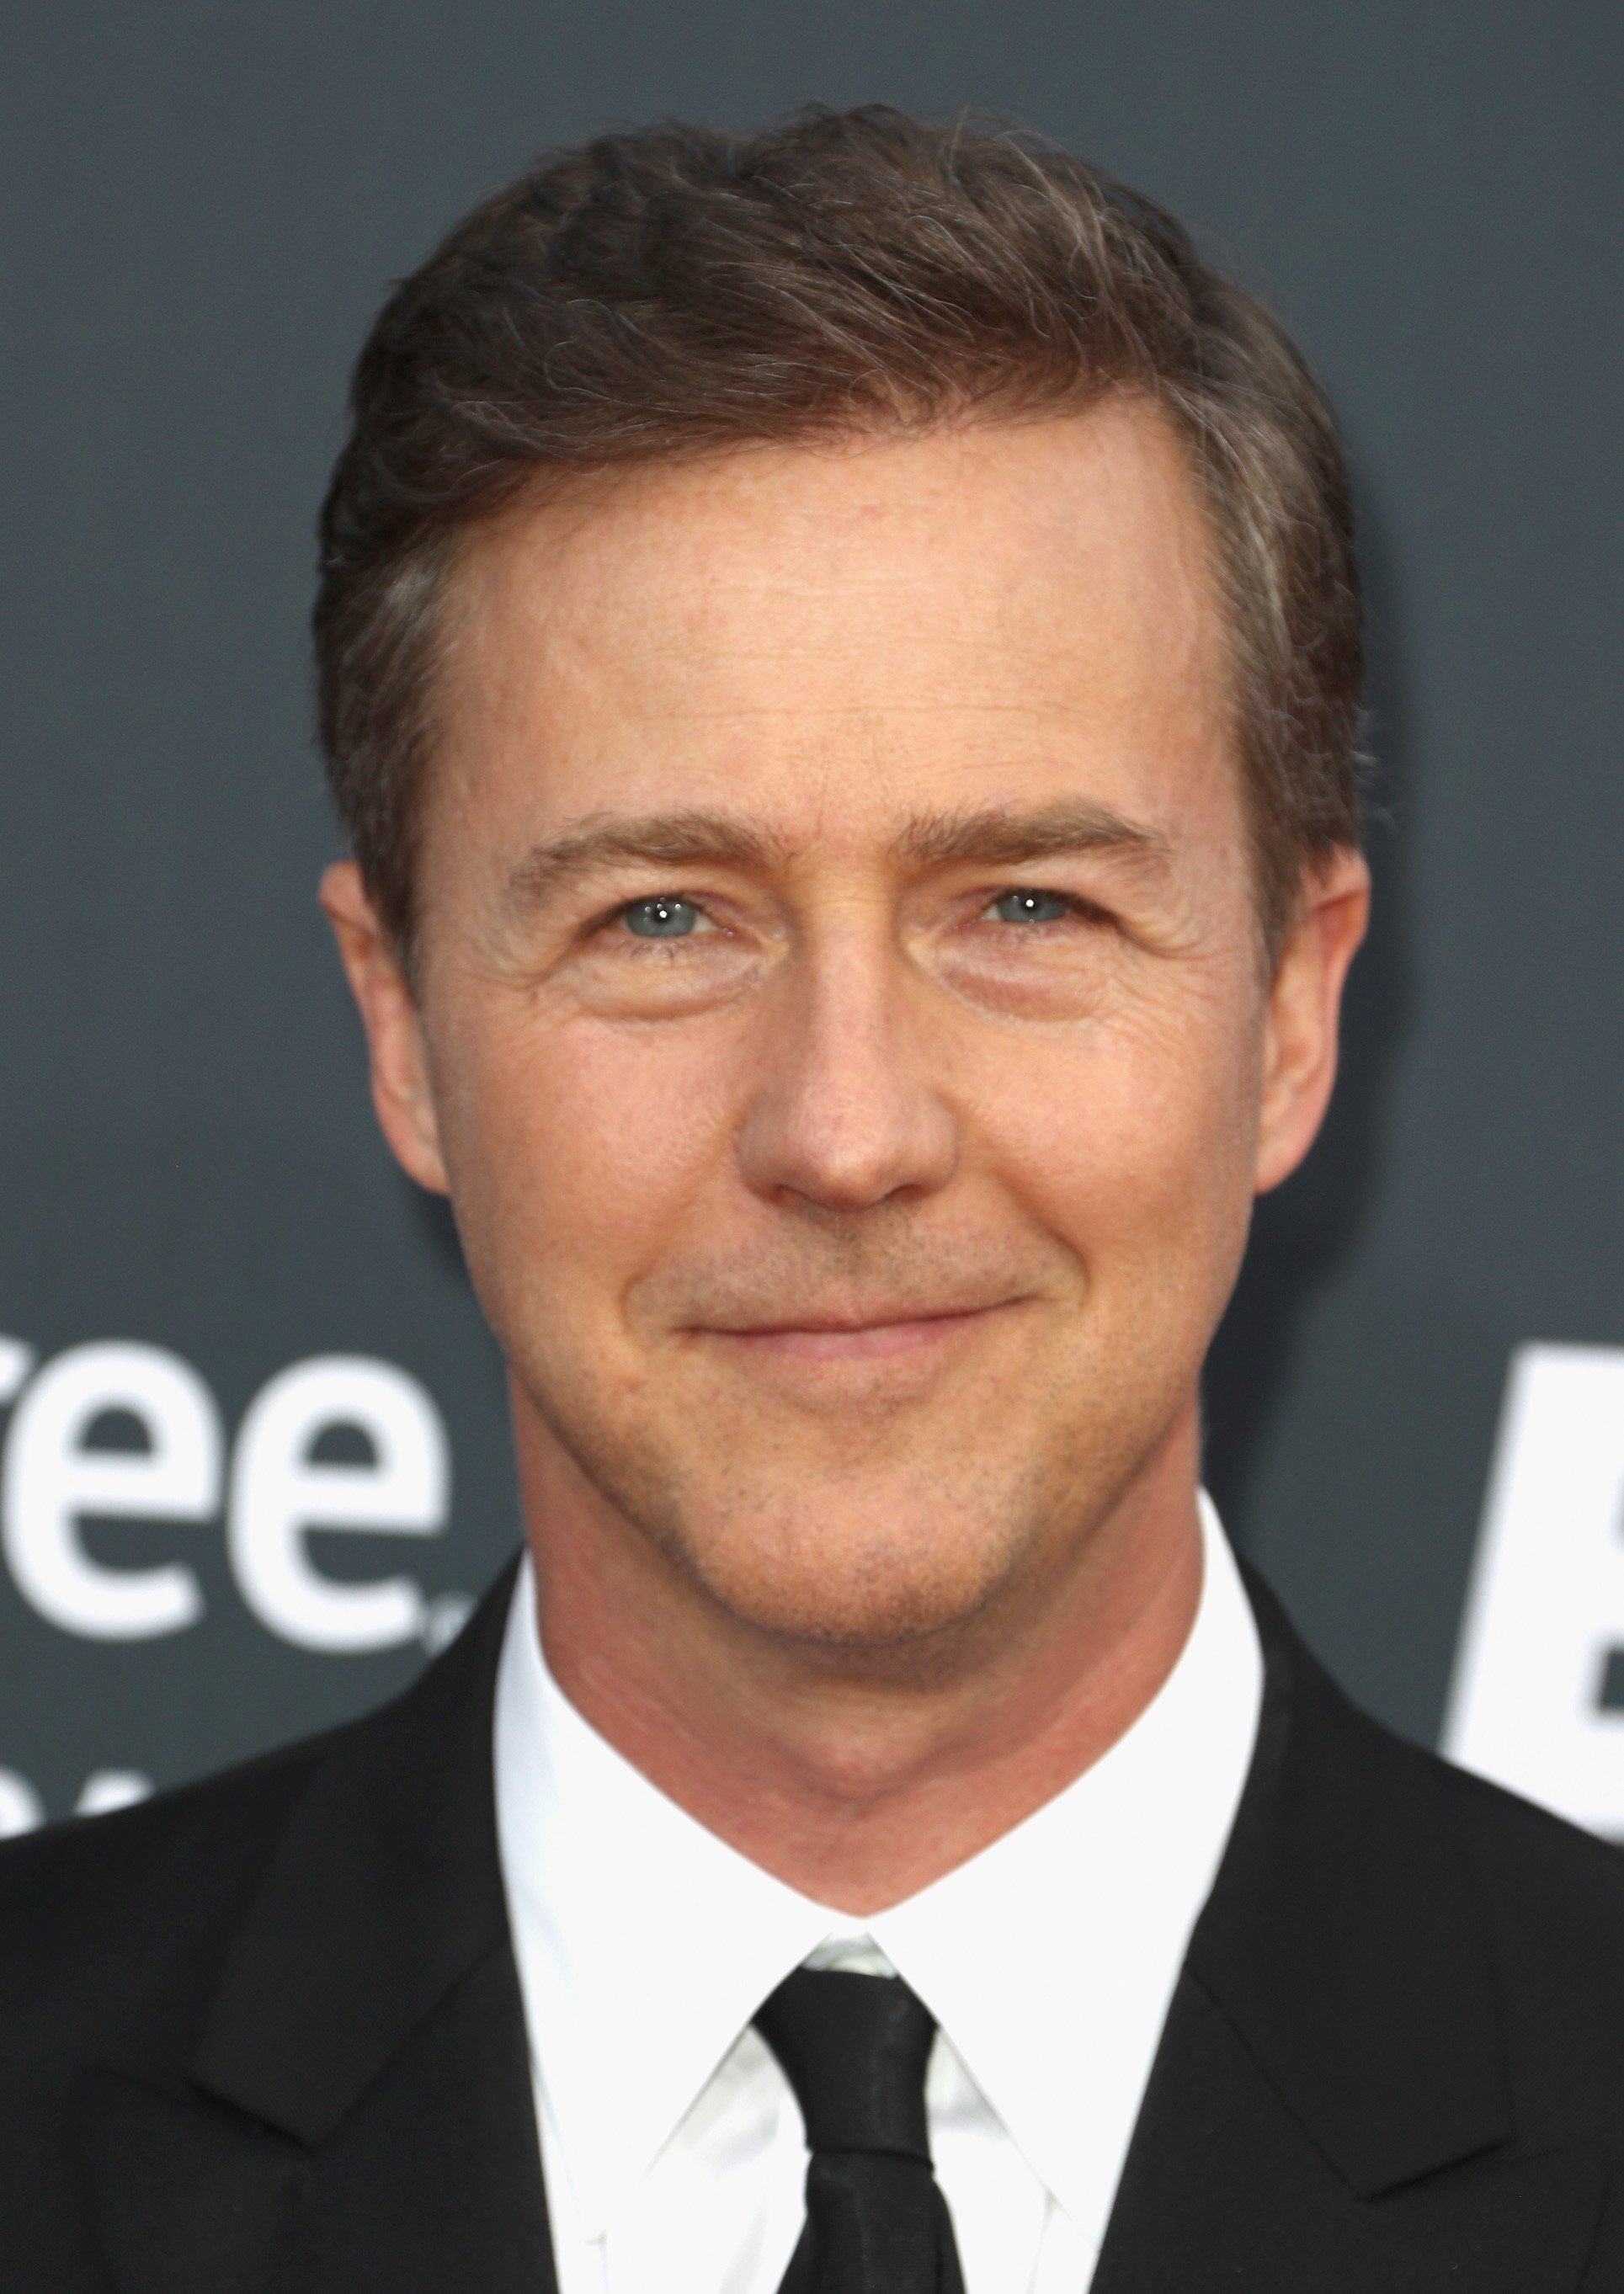 Edward Norton attends the Comedy Central Roast of Bruce Willis at Hollywood Palladium on July 14, 2018, in Los Angeles, California. | Source: Getty Images.